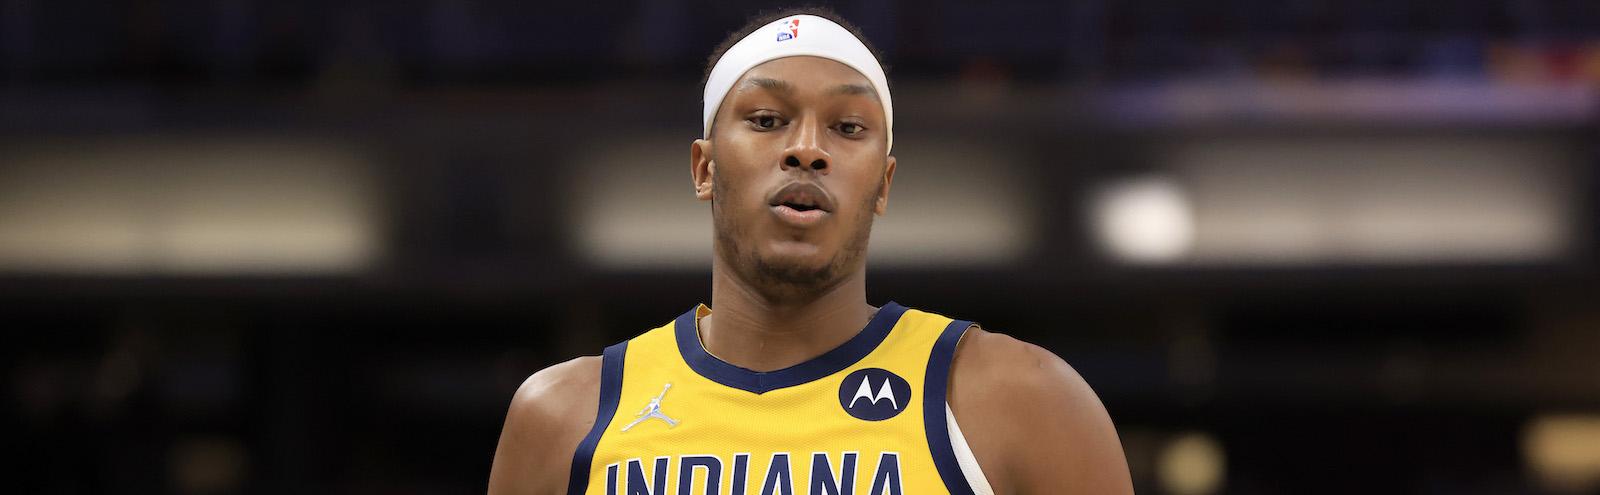 Myles Turner And BabyTron Made A $100,000 Bet